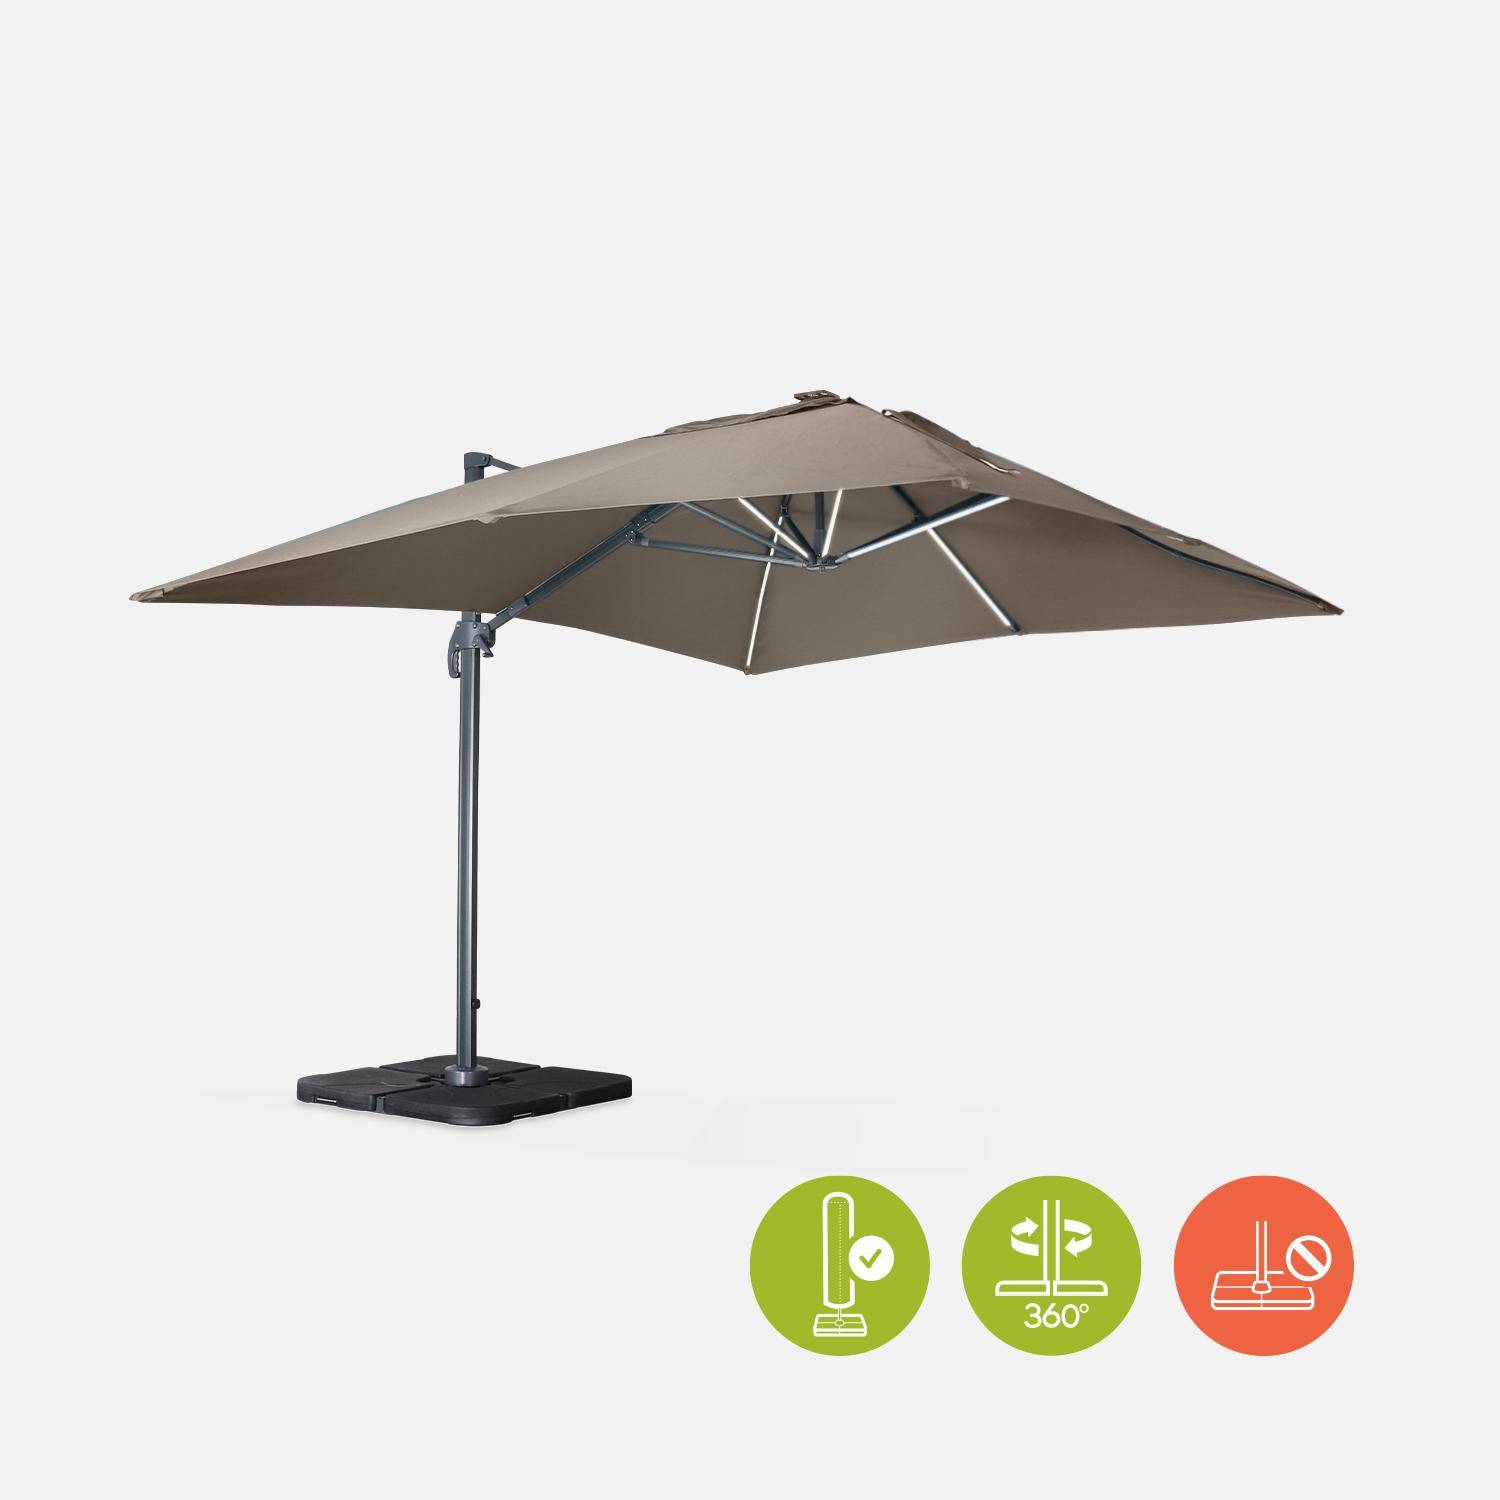 Premium rectangular 3x4m cantilever parasol with solar-powered integrated LED lights - Cantilever parasol, tiltable, foldable with 360° rotation, solar charging, cover included - Luce - Beige-brown Photo2